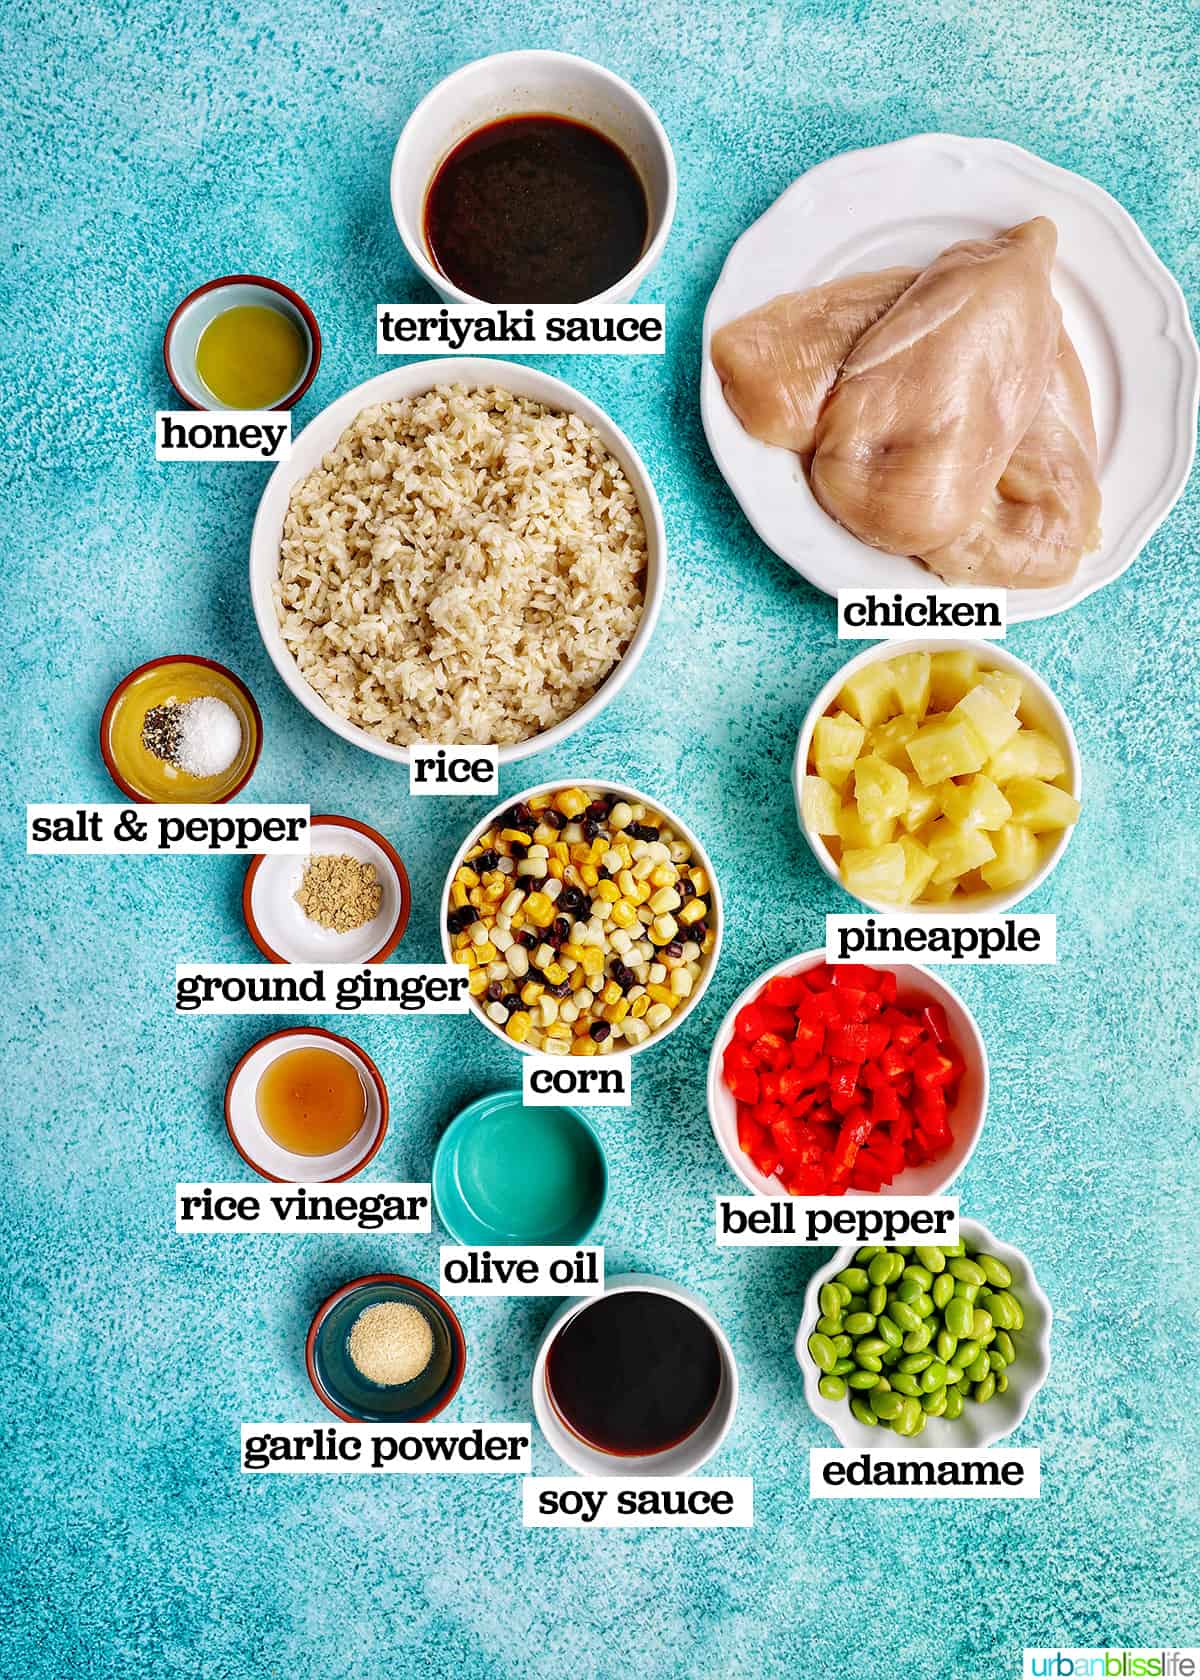 bowls of ingredients to make chicken teriyaki donburi rice bowls on a bright blue background.